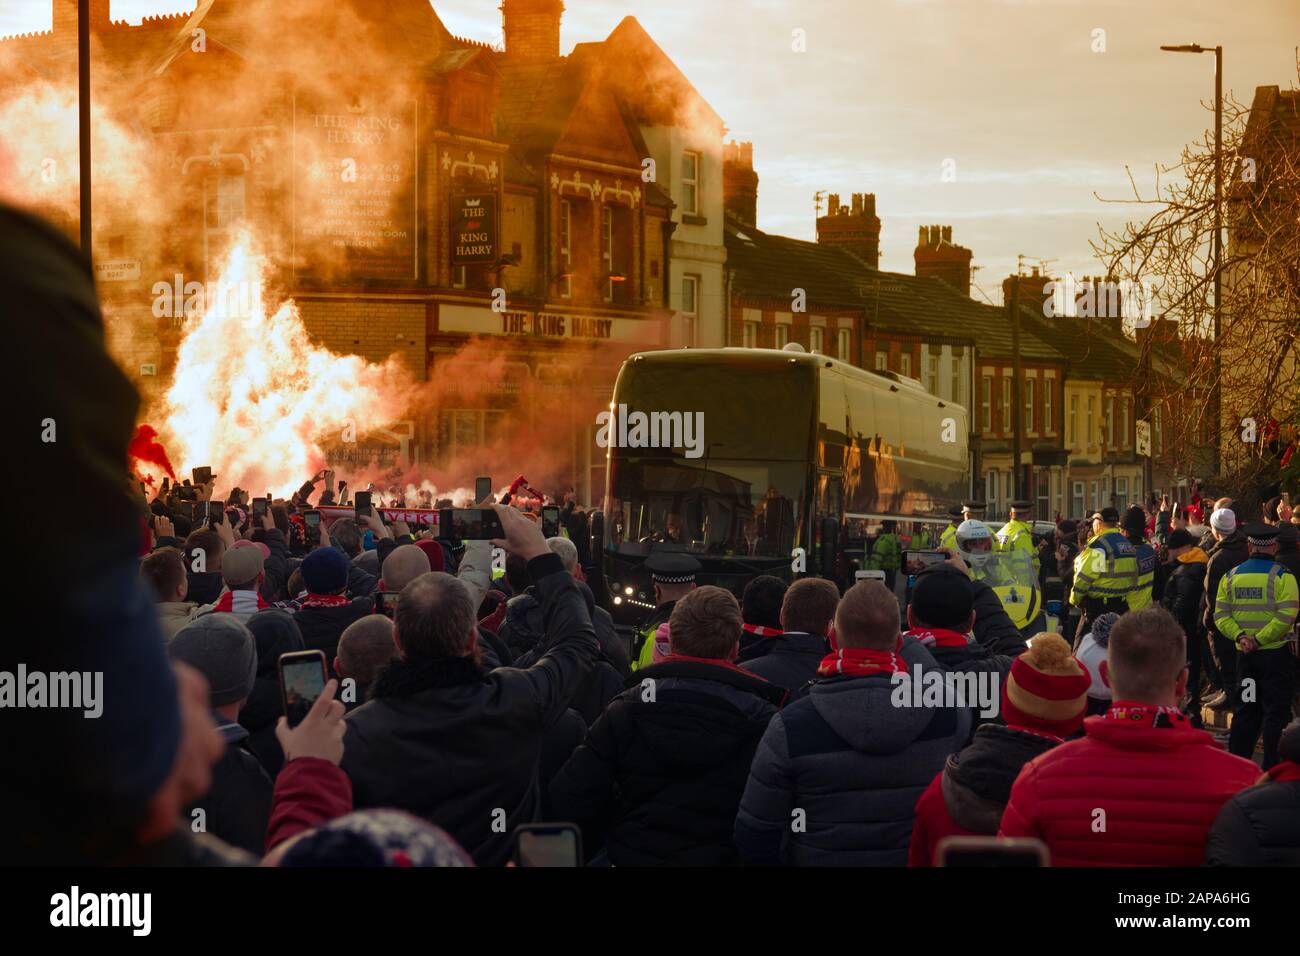 LFC fans give the Manchester United coach a hostile reception with pyro and flares prior to their Premier League game at Anfield. Stock Photo